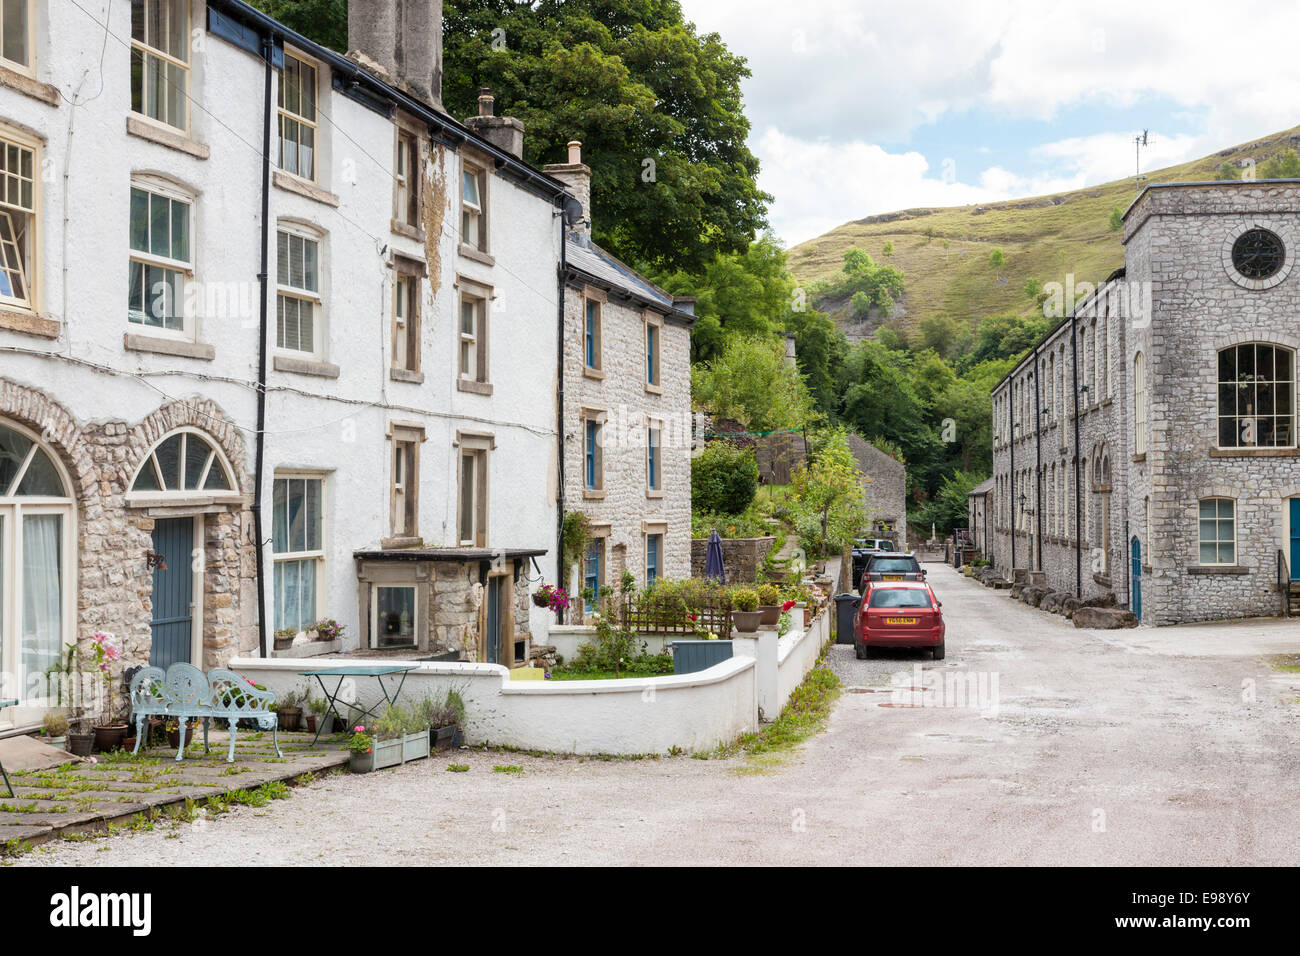 The road and a row of terraced cottages with the mill (on the right) in the hamlet of Litton Mill, Derbyshire, England, UK Stock Photo